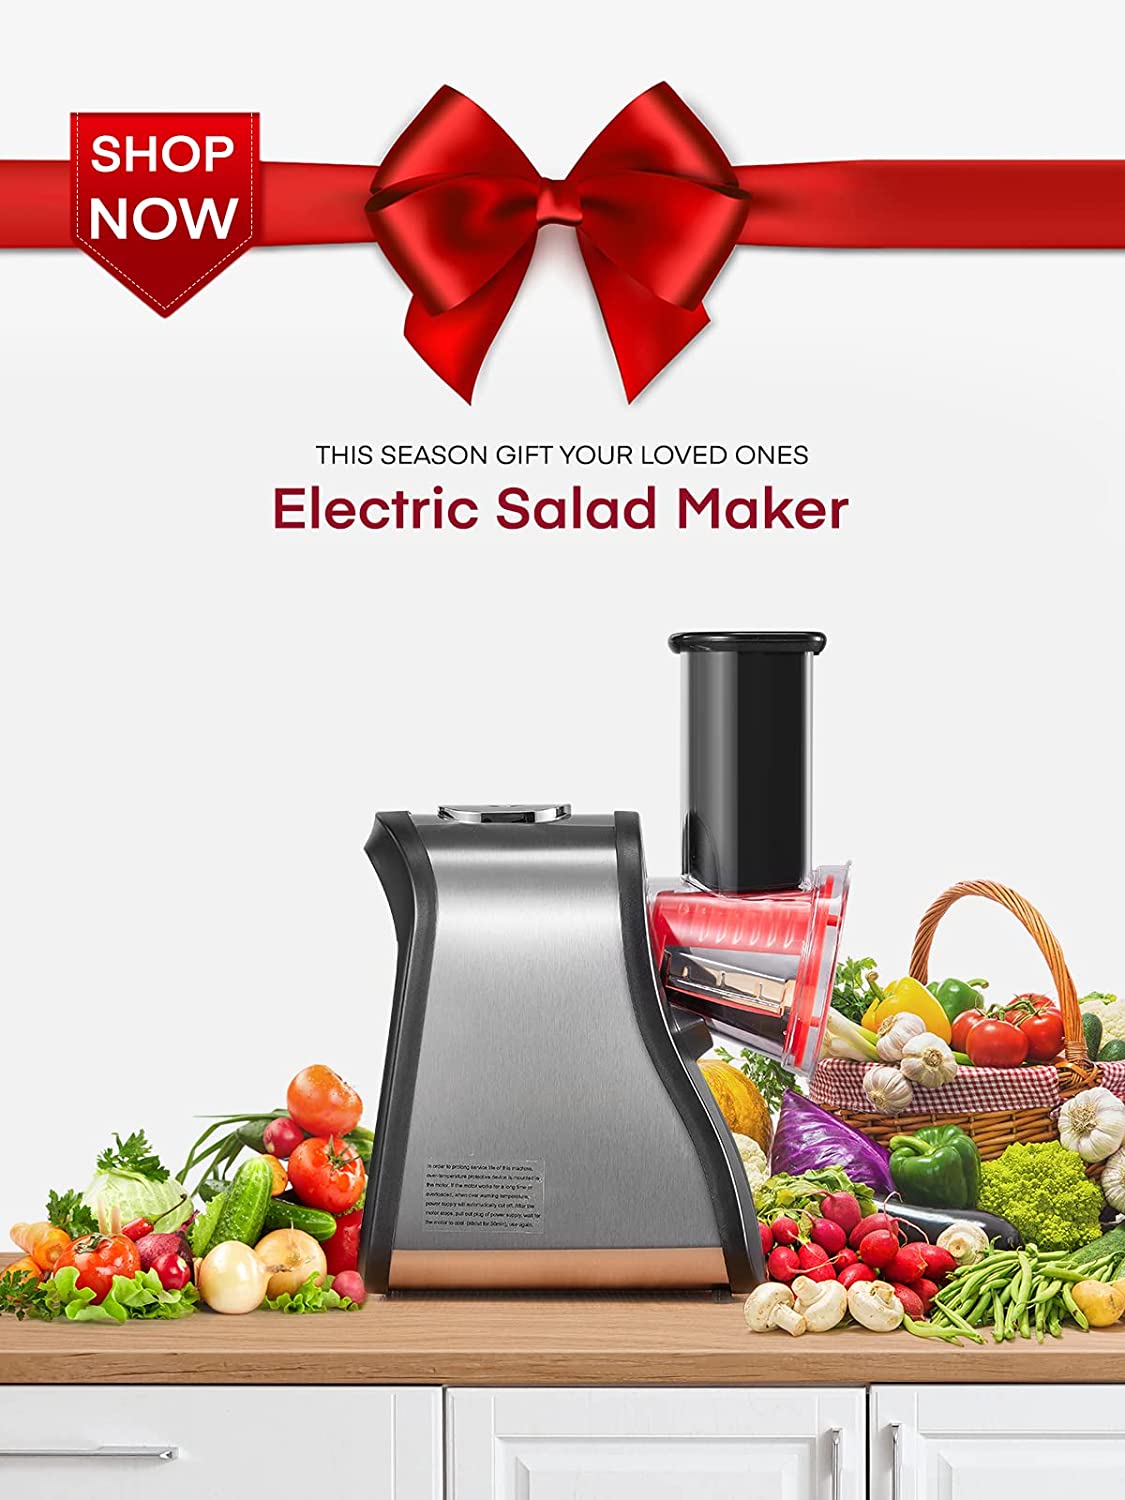 electric salad maker, FOHERE Electric Cheese Grater Shredder, Electric Vegetable Slicer Professional Salad Shooter for Home Kitchen Use, One-Touch Easy Control, Salad Maker Machine for Vegetables, Cheeses, BPA-Free, Red